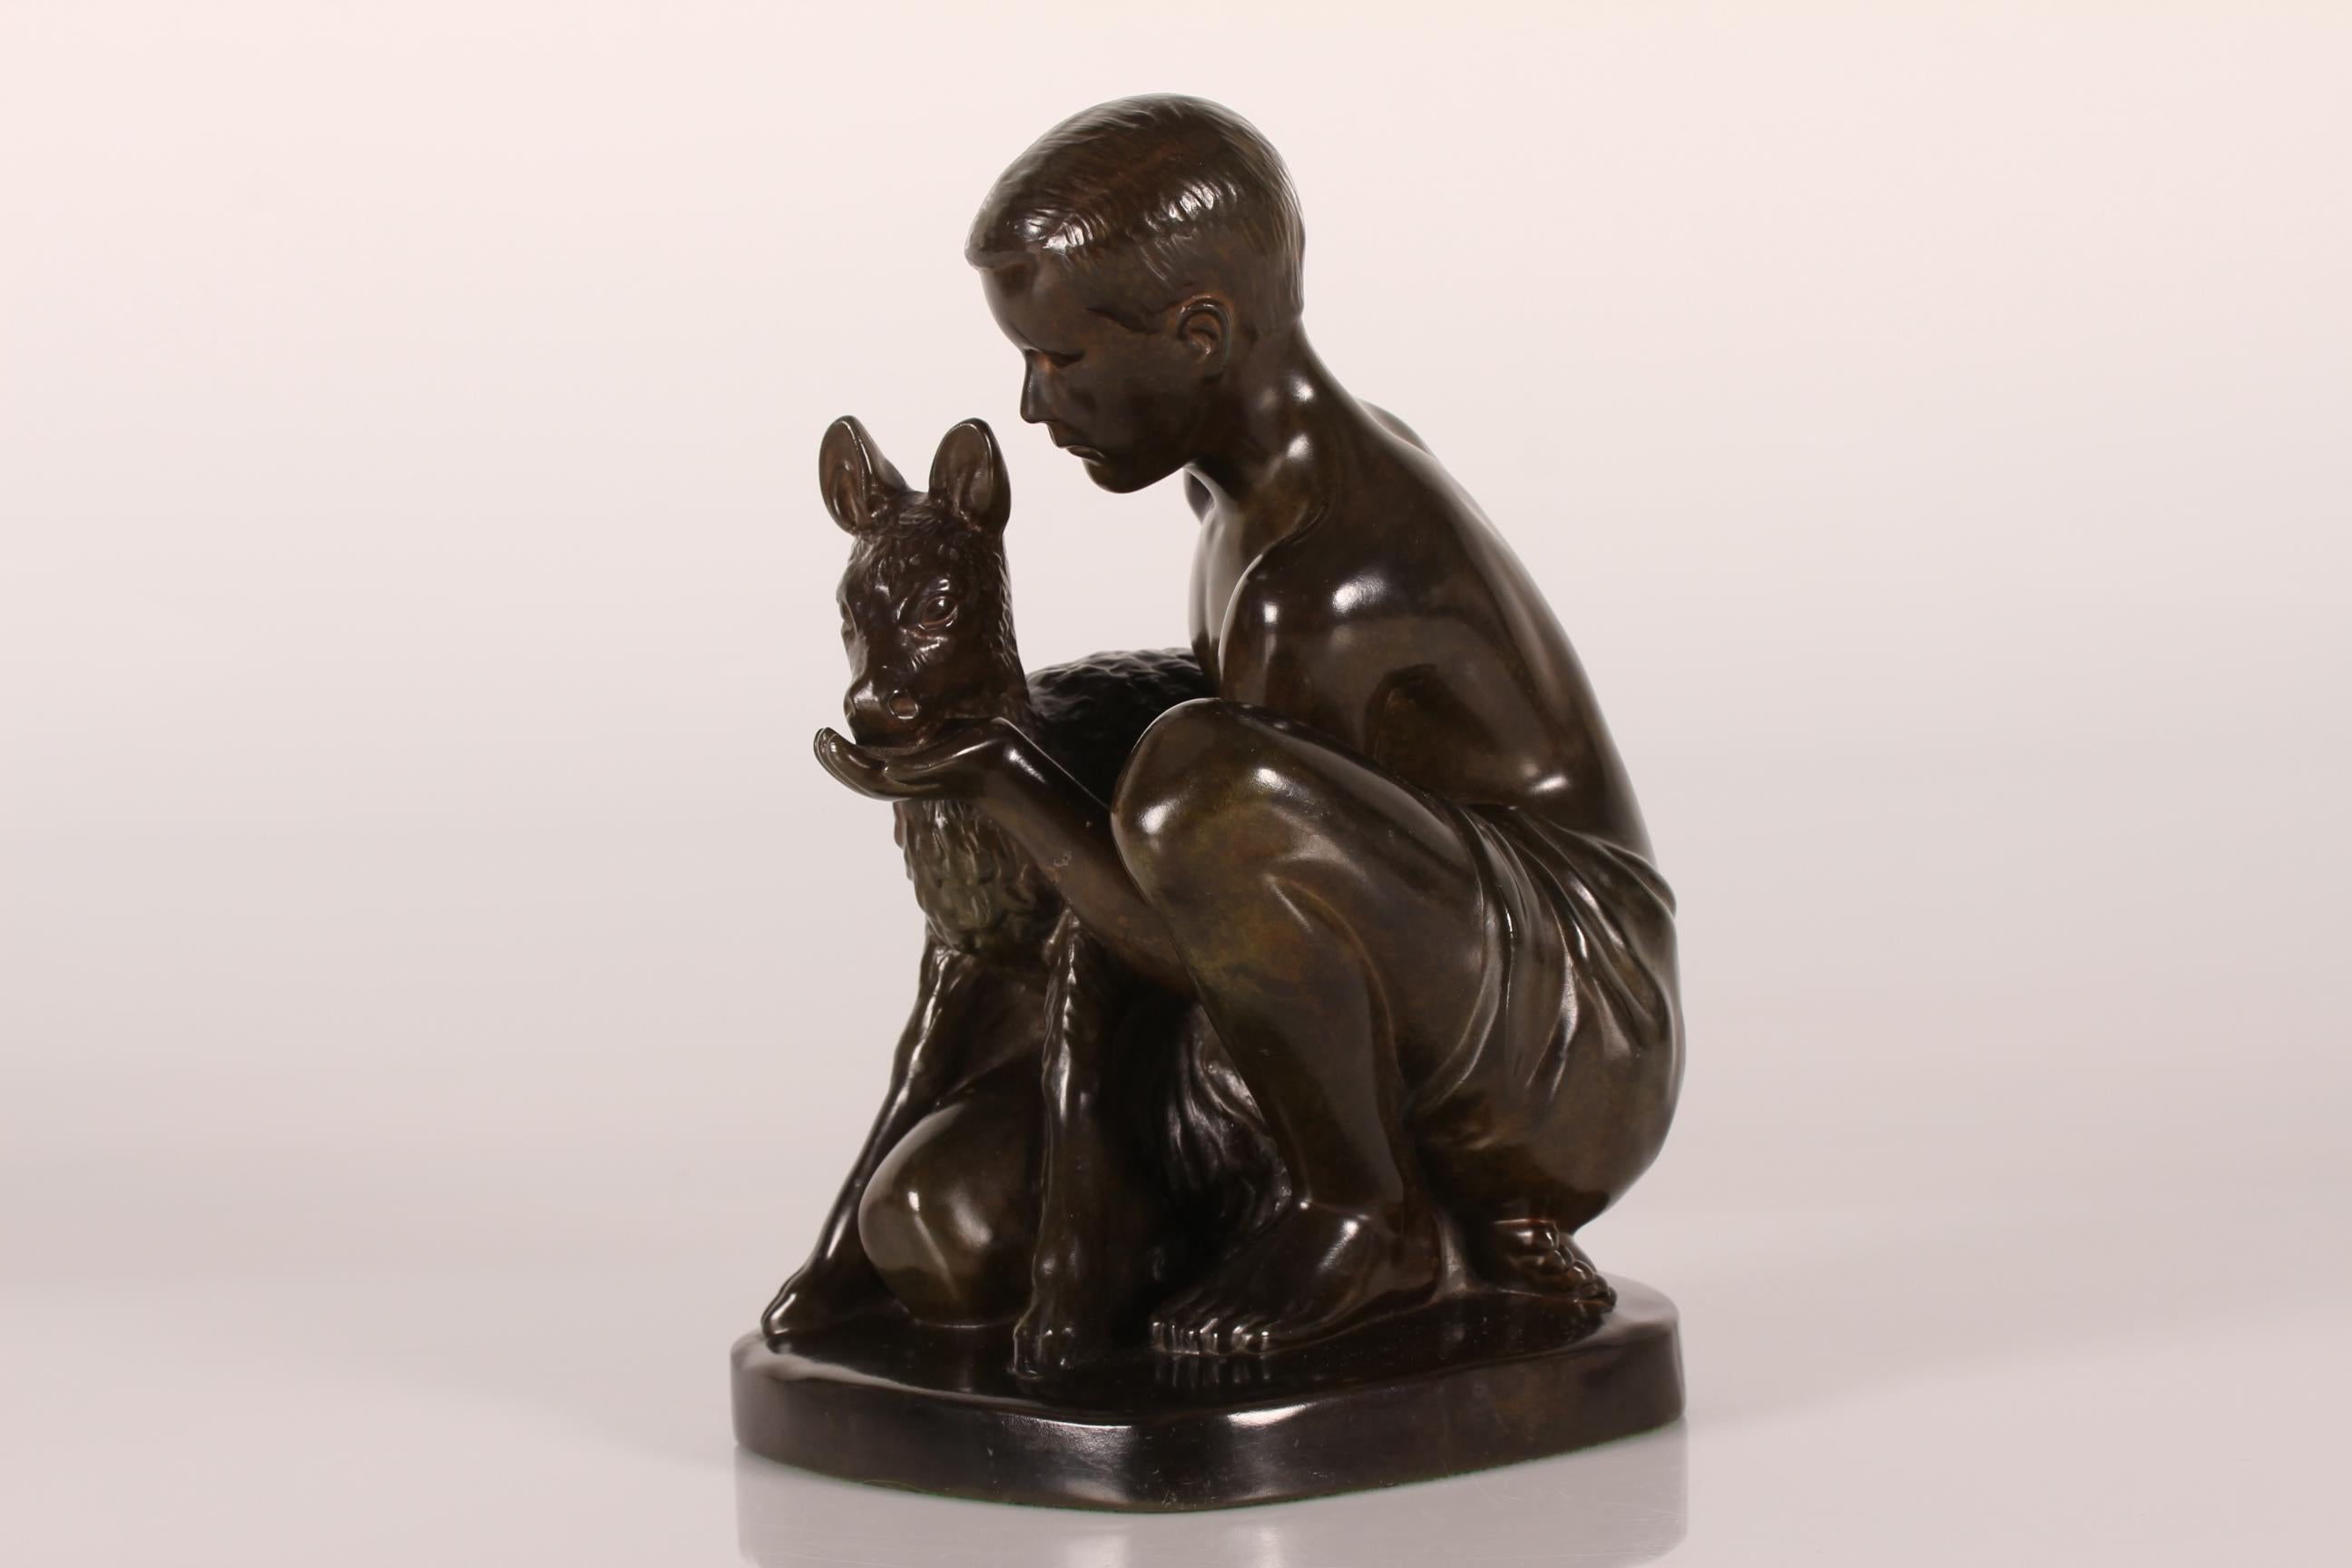 Original figurine designed by Danish artist and sculptor Just Andersen (1884-1943) featuring a young shepherd feeding a lamb.
It's made in Denmark in the 1940s or 1950s of Just Andersens own disco metal with brown patina.
Sign. Just A. + model D2313